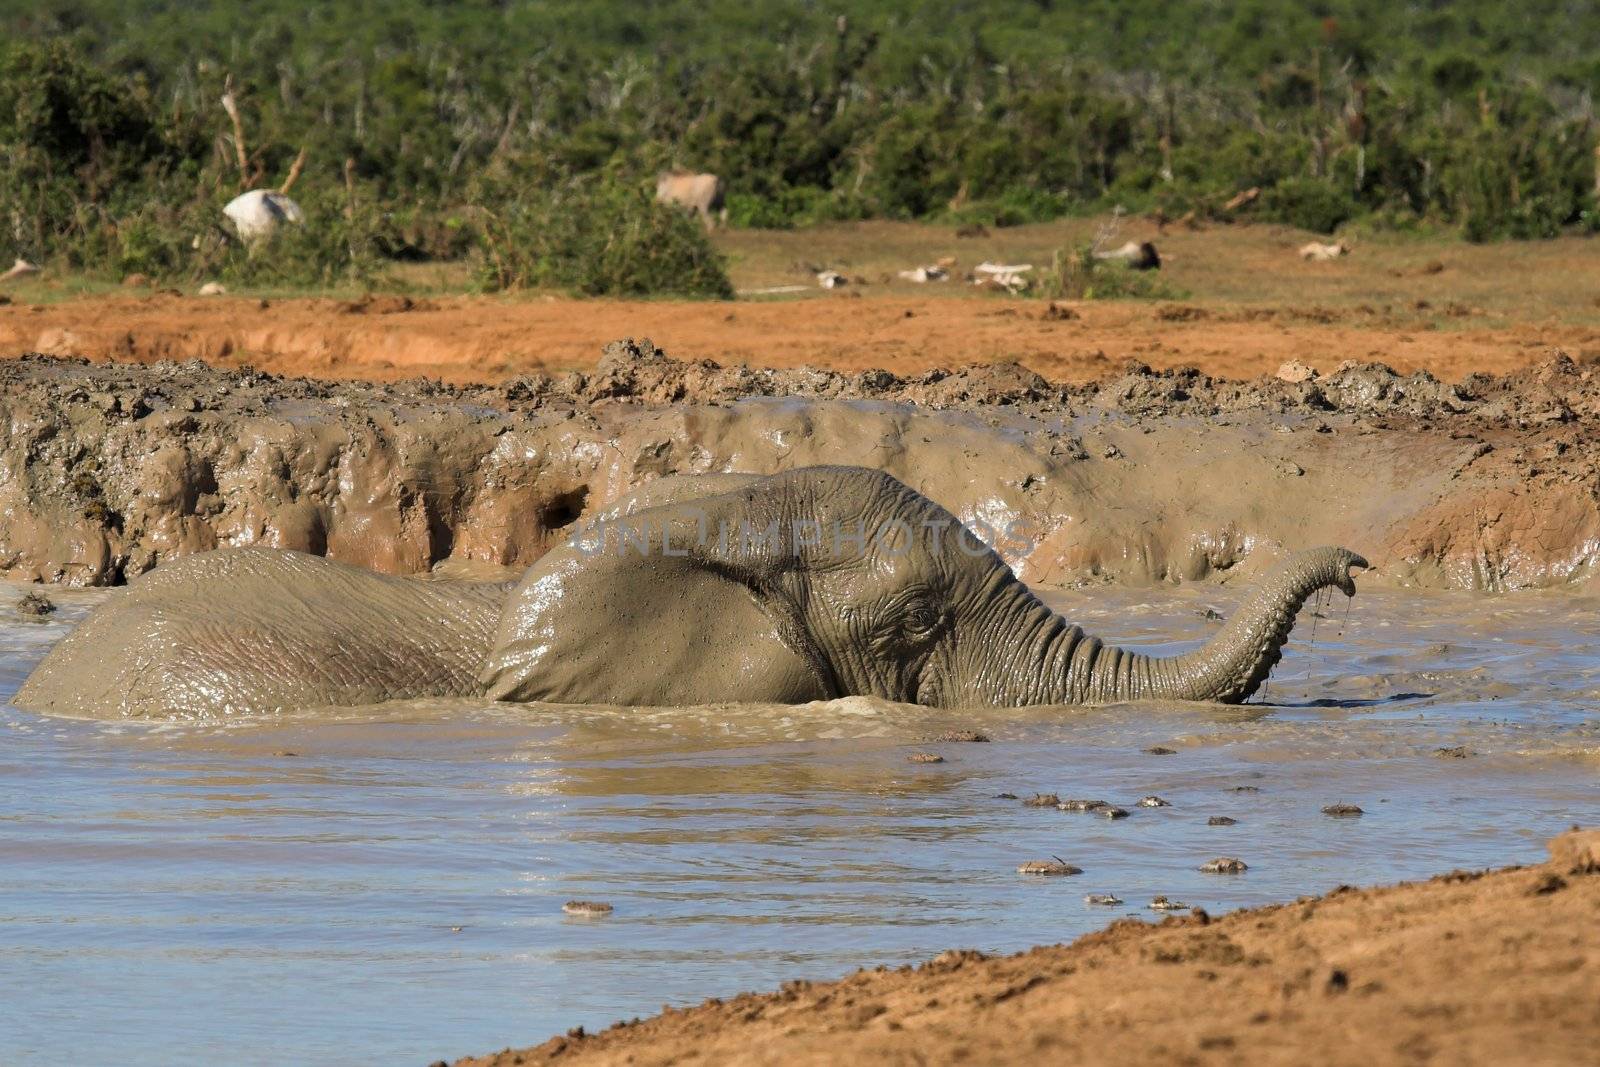 African Elephant using its trunk to breath above water